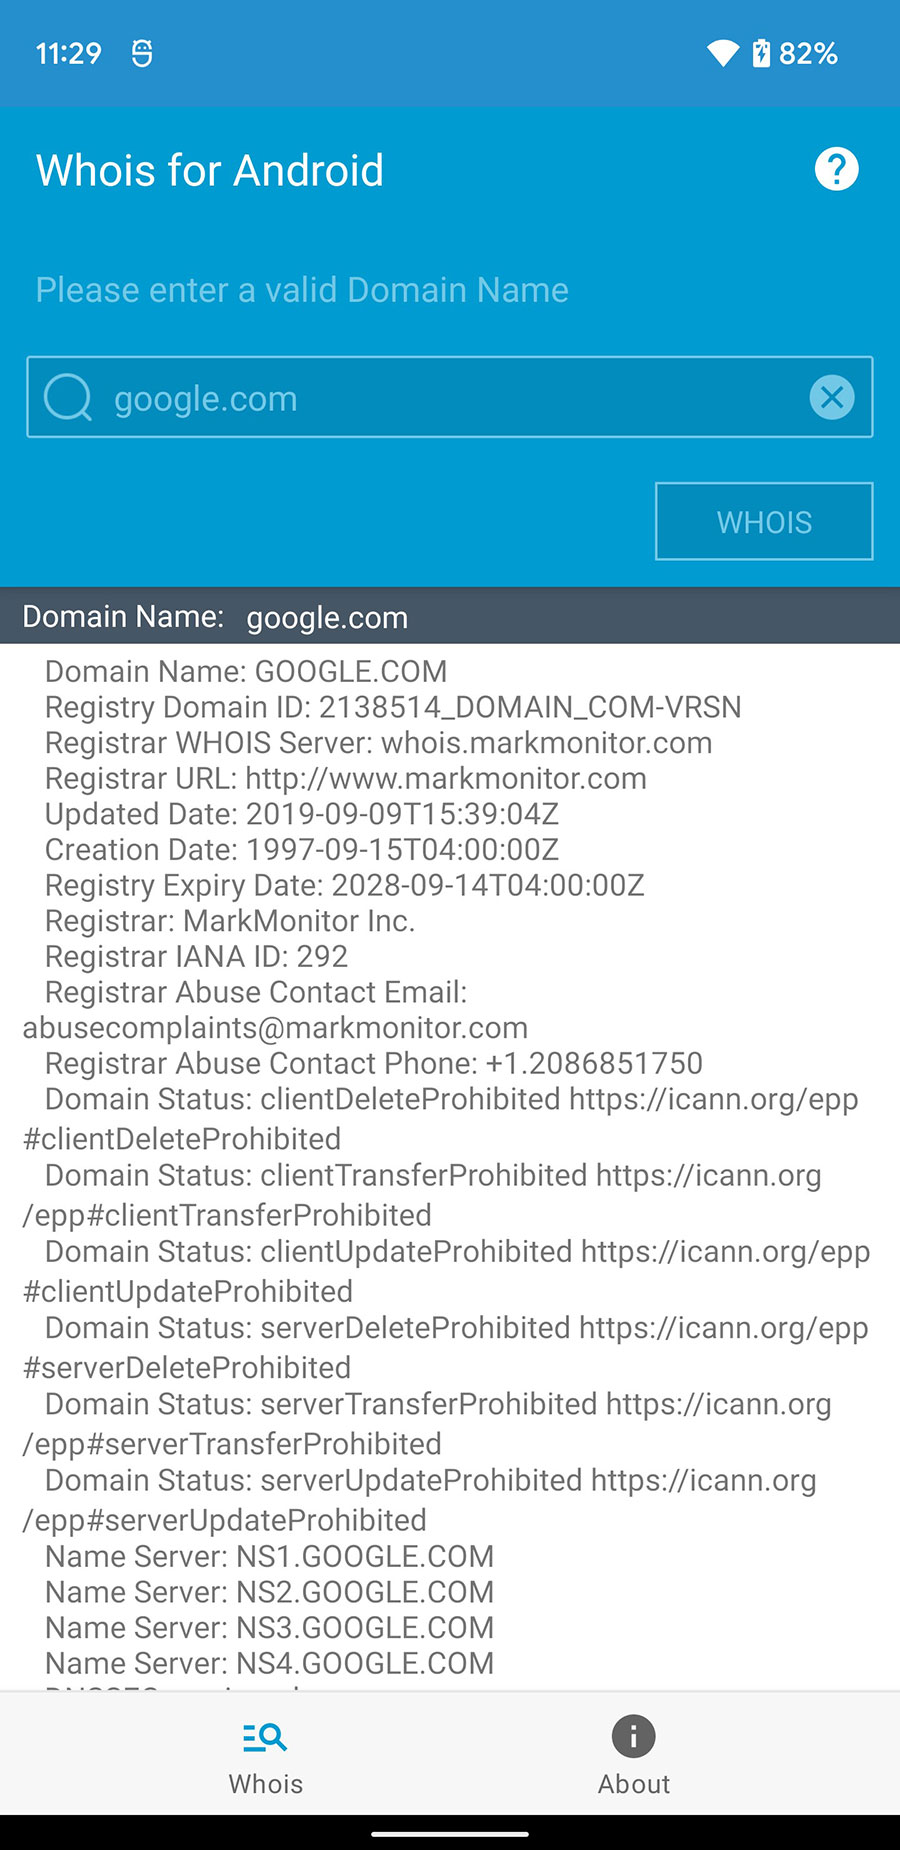 whois for android app